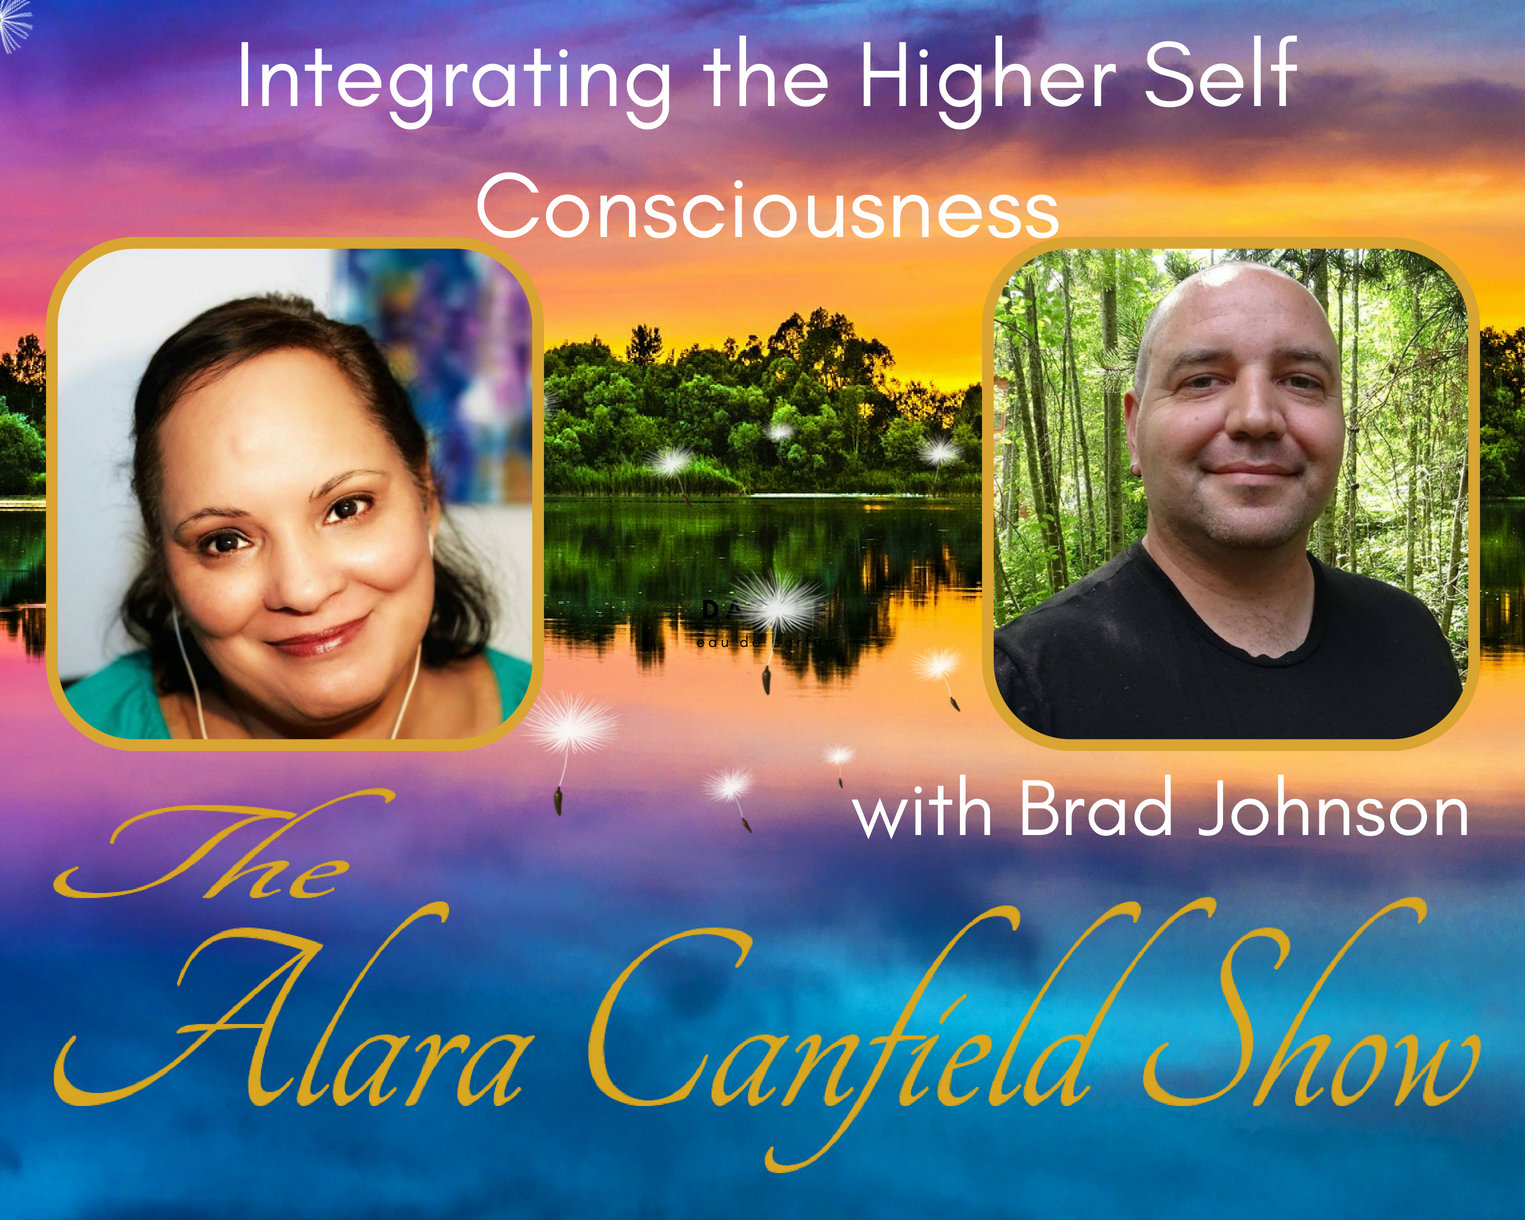 Integrating the Higher Self Consciousness with Brad Johnson